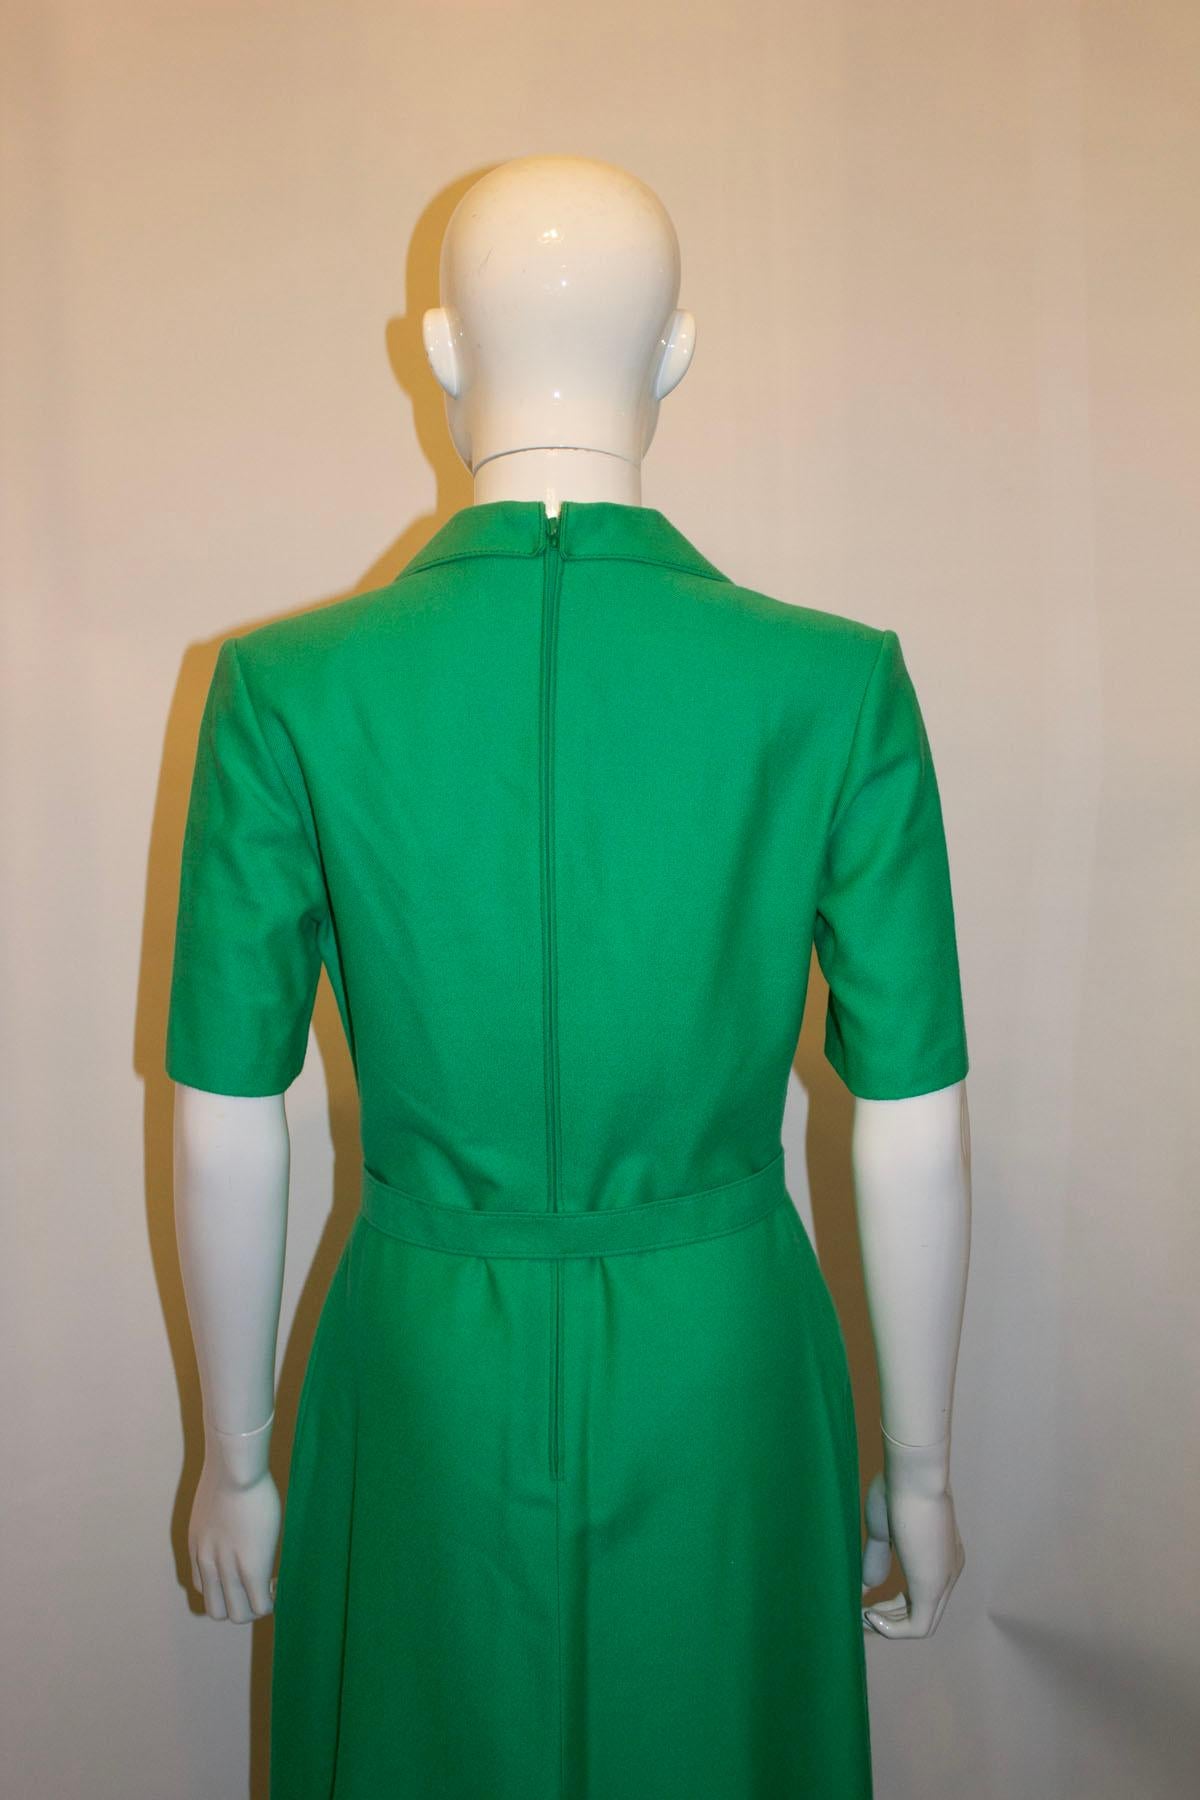 A chic and easy to wear vintage dress by BaoBod ,styled by Fritschen. The dress is in a green wool,  and fully lined. It has pleats on the front , a back central zip, short sleaves and a self fabric belt.  Size 38
Measurements: Bust 36'', waist